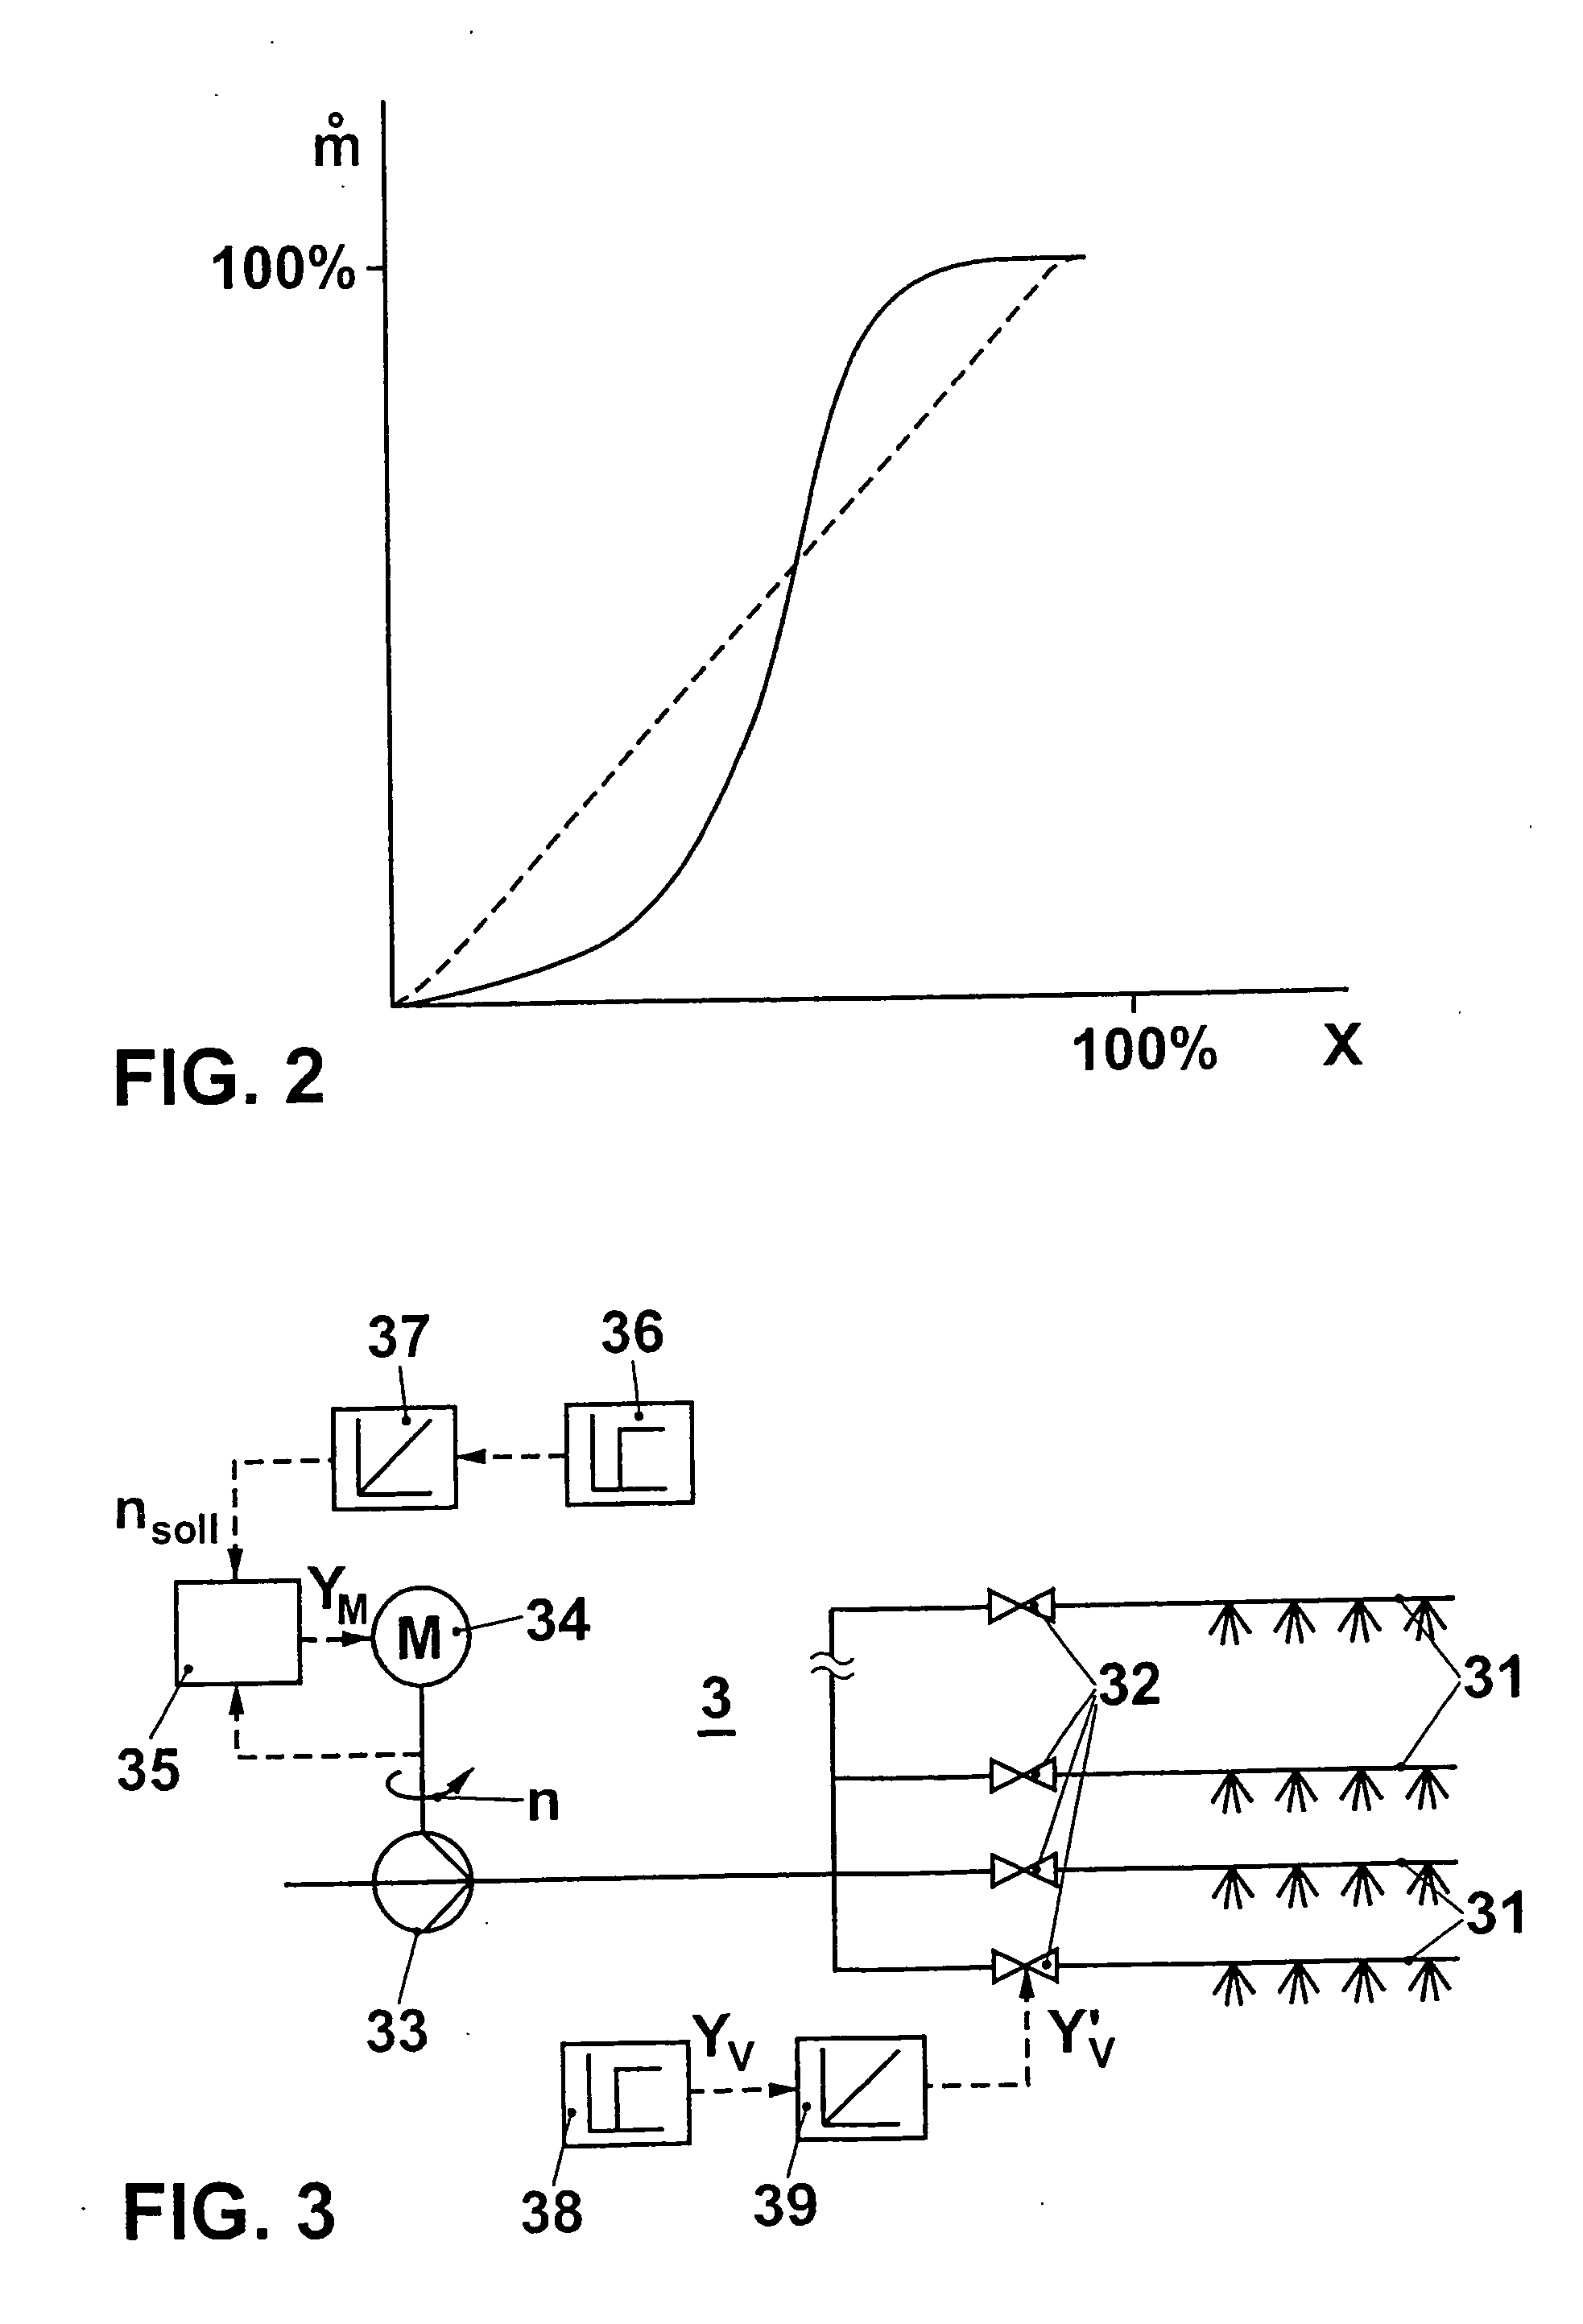 Method for injecting a liquid mist into an intake duct